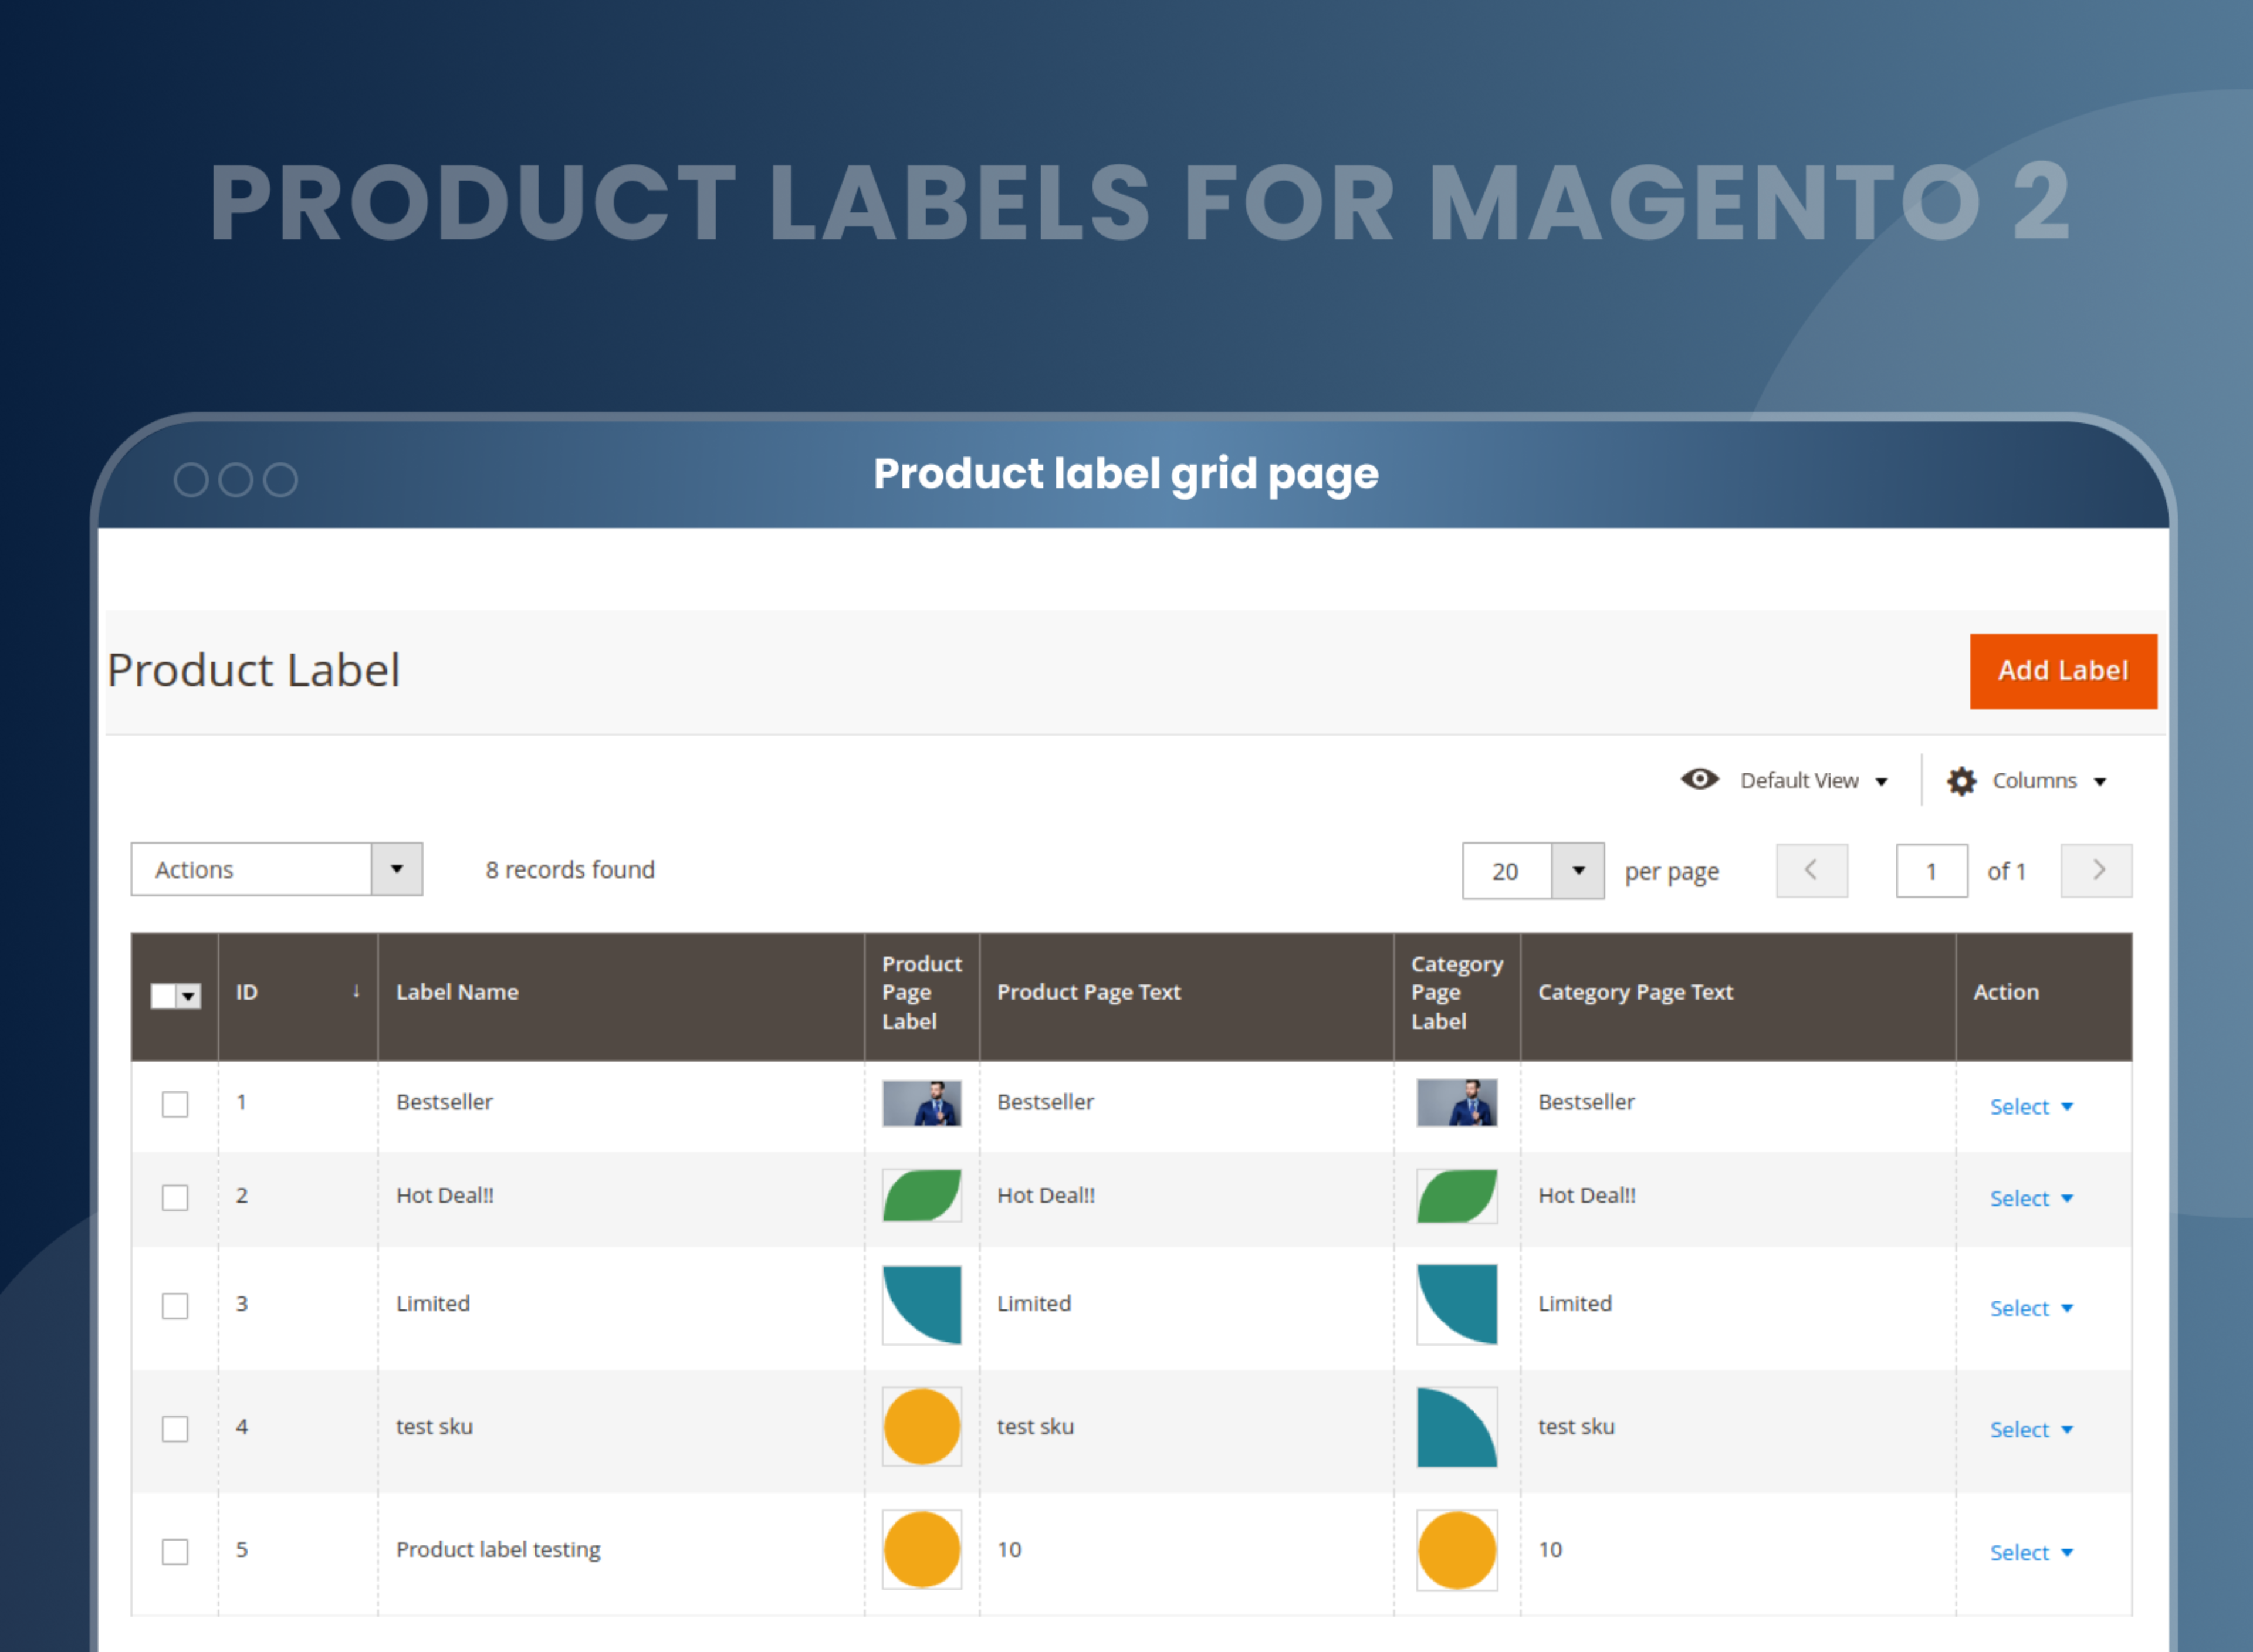 Product label grid page